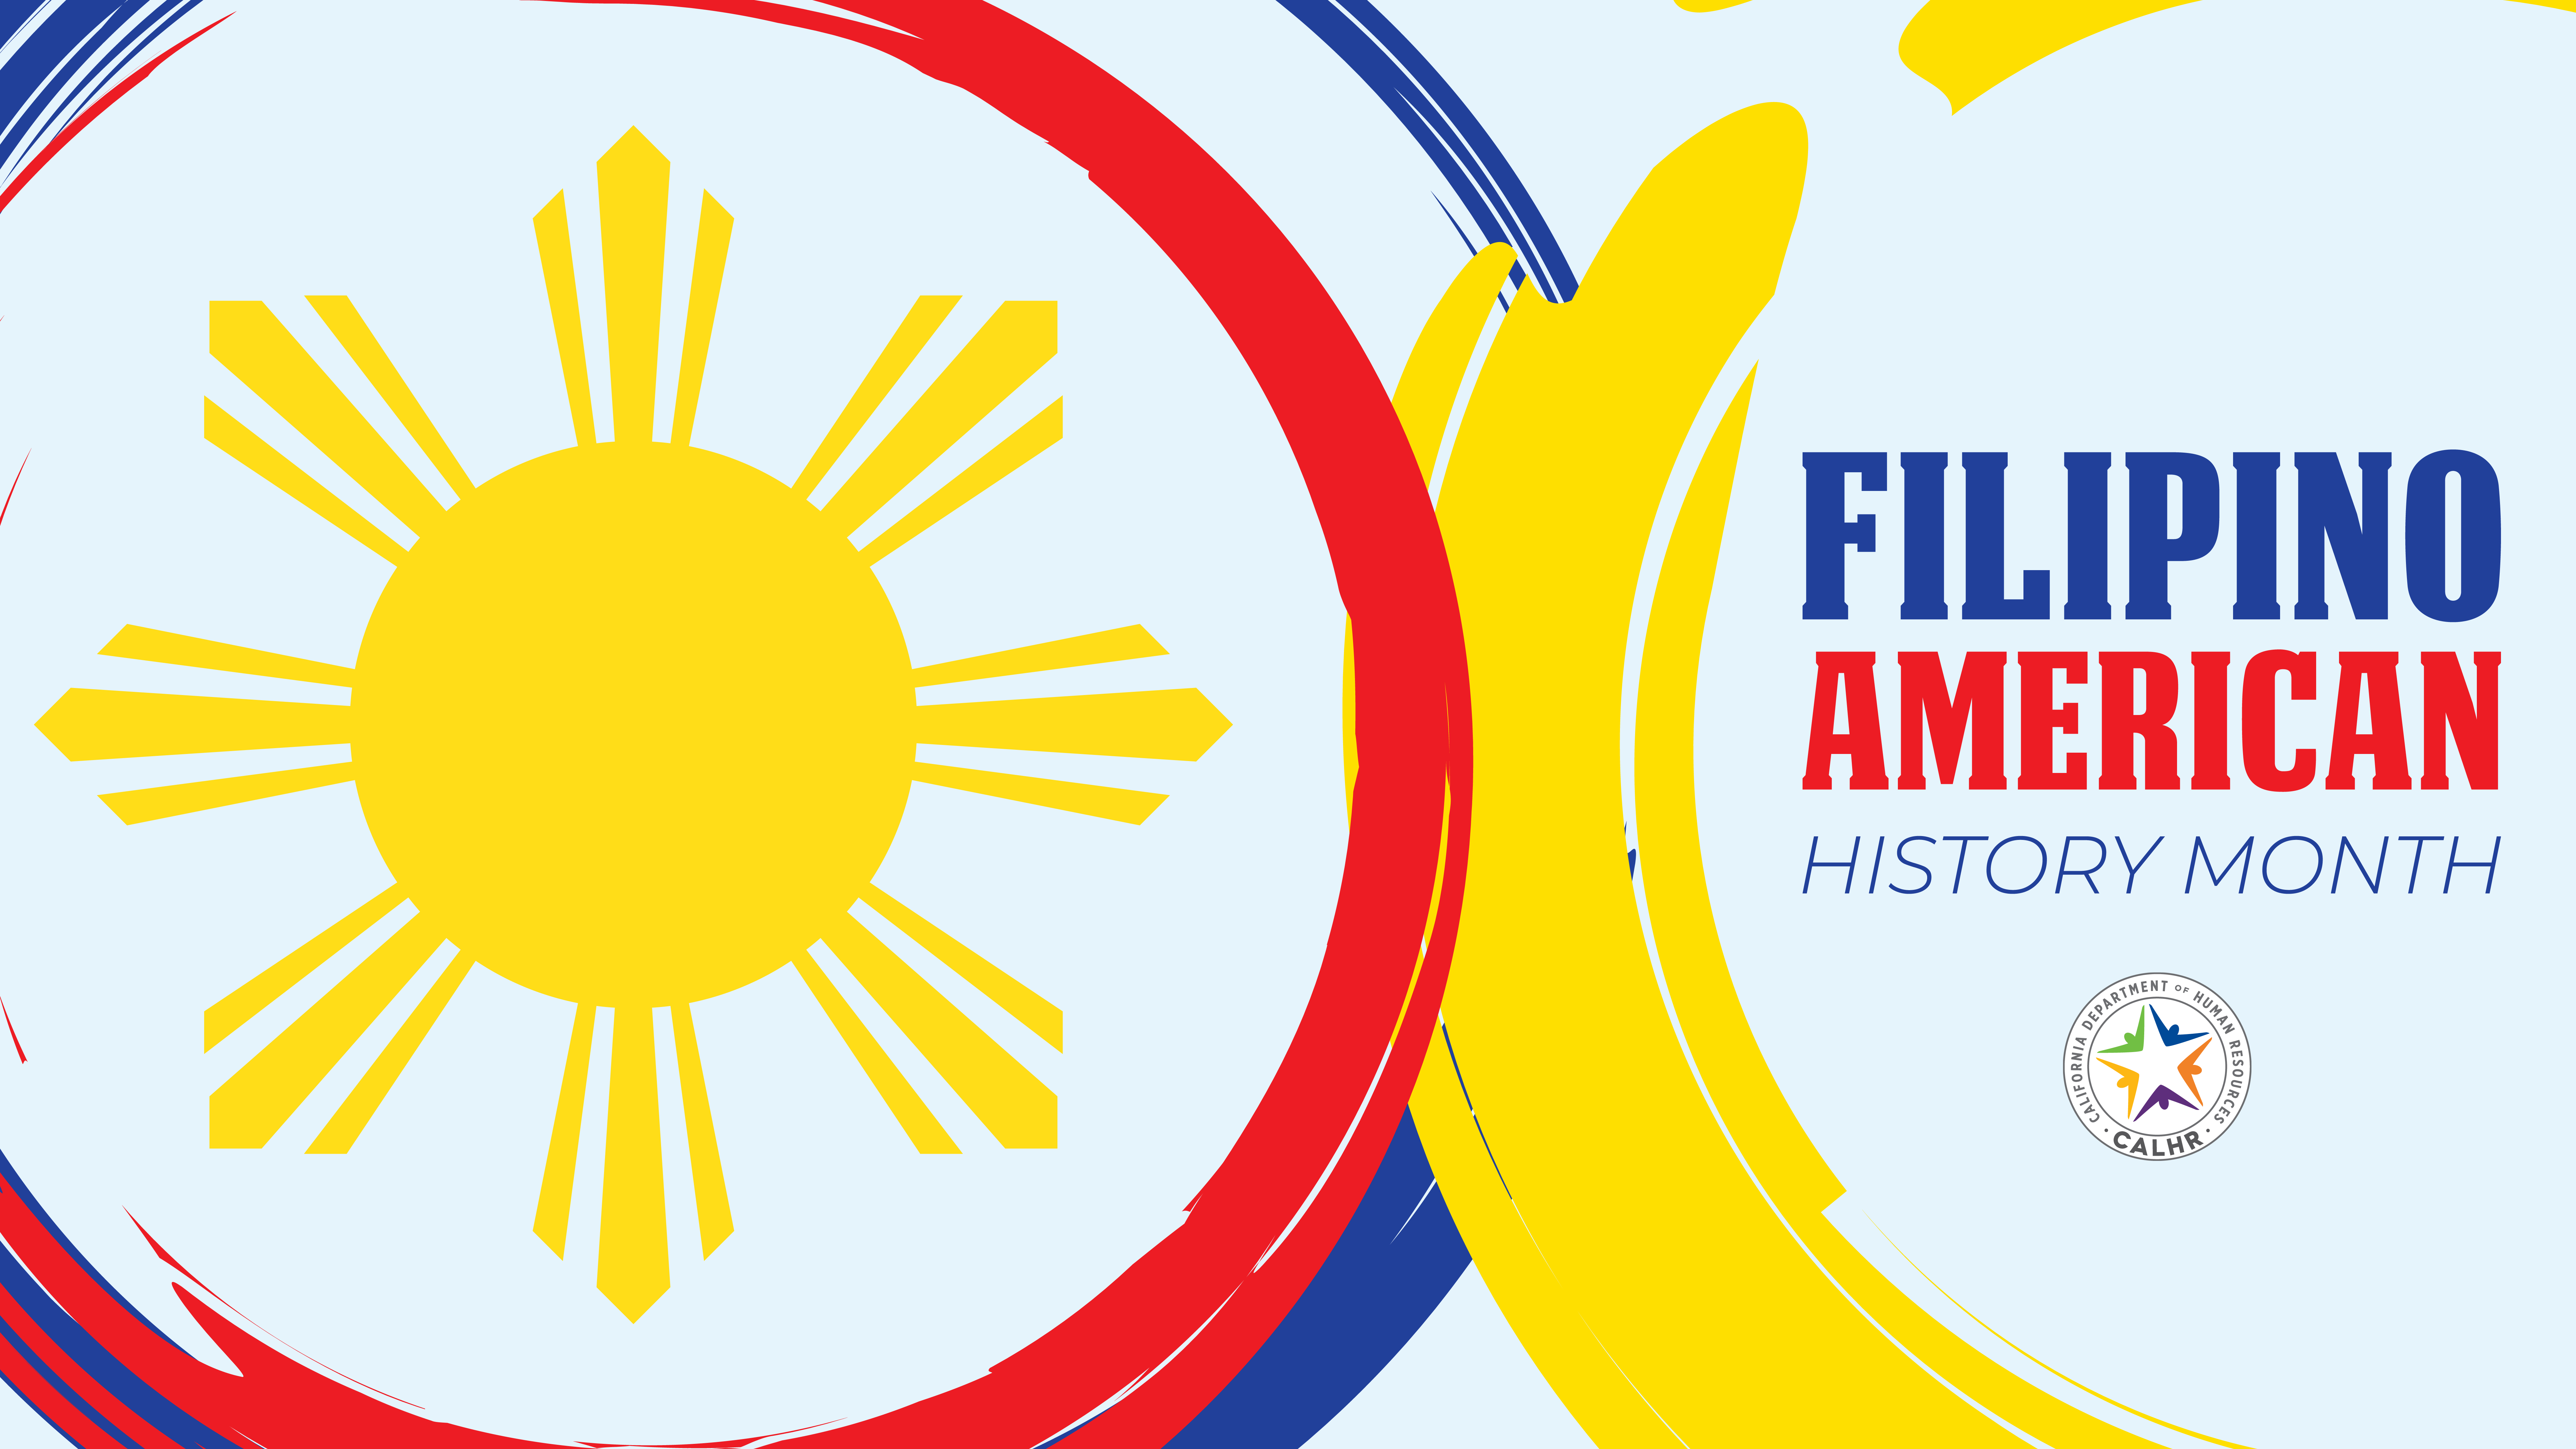 white background with red, yellow, and blue circles. Sun on the left Filipino American History Month